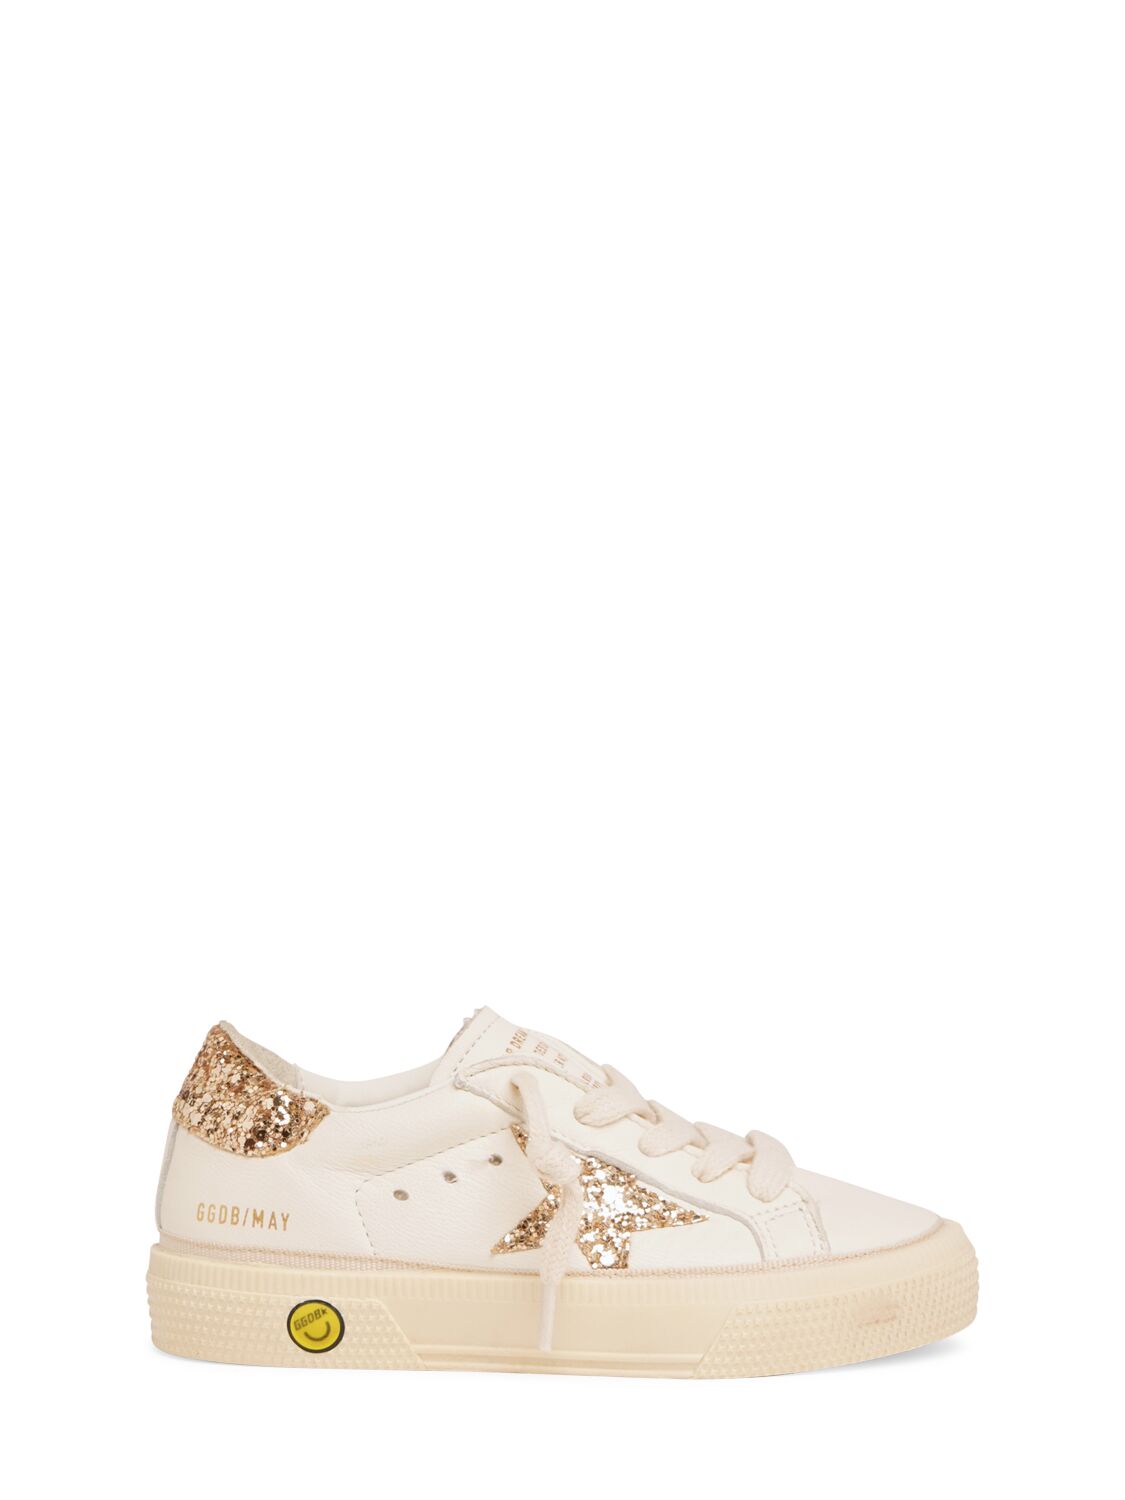 May Leather Glitter Lace-up Sneakers